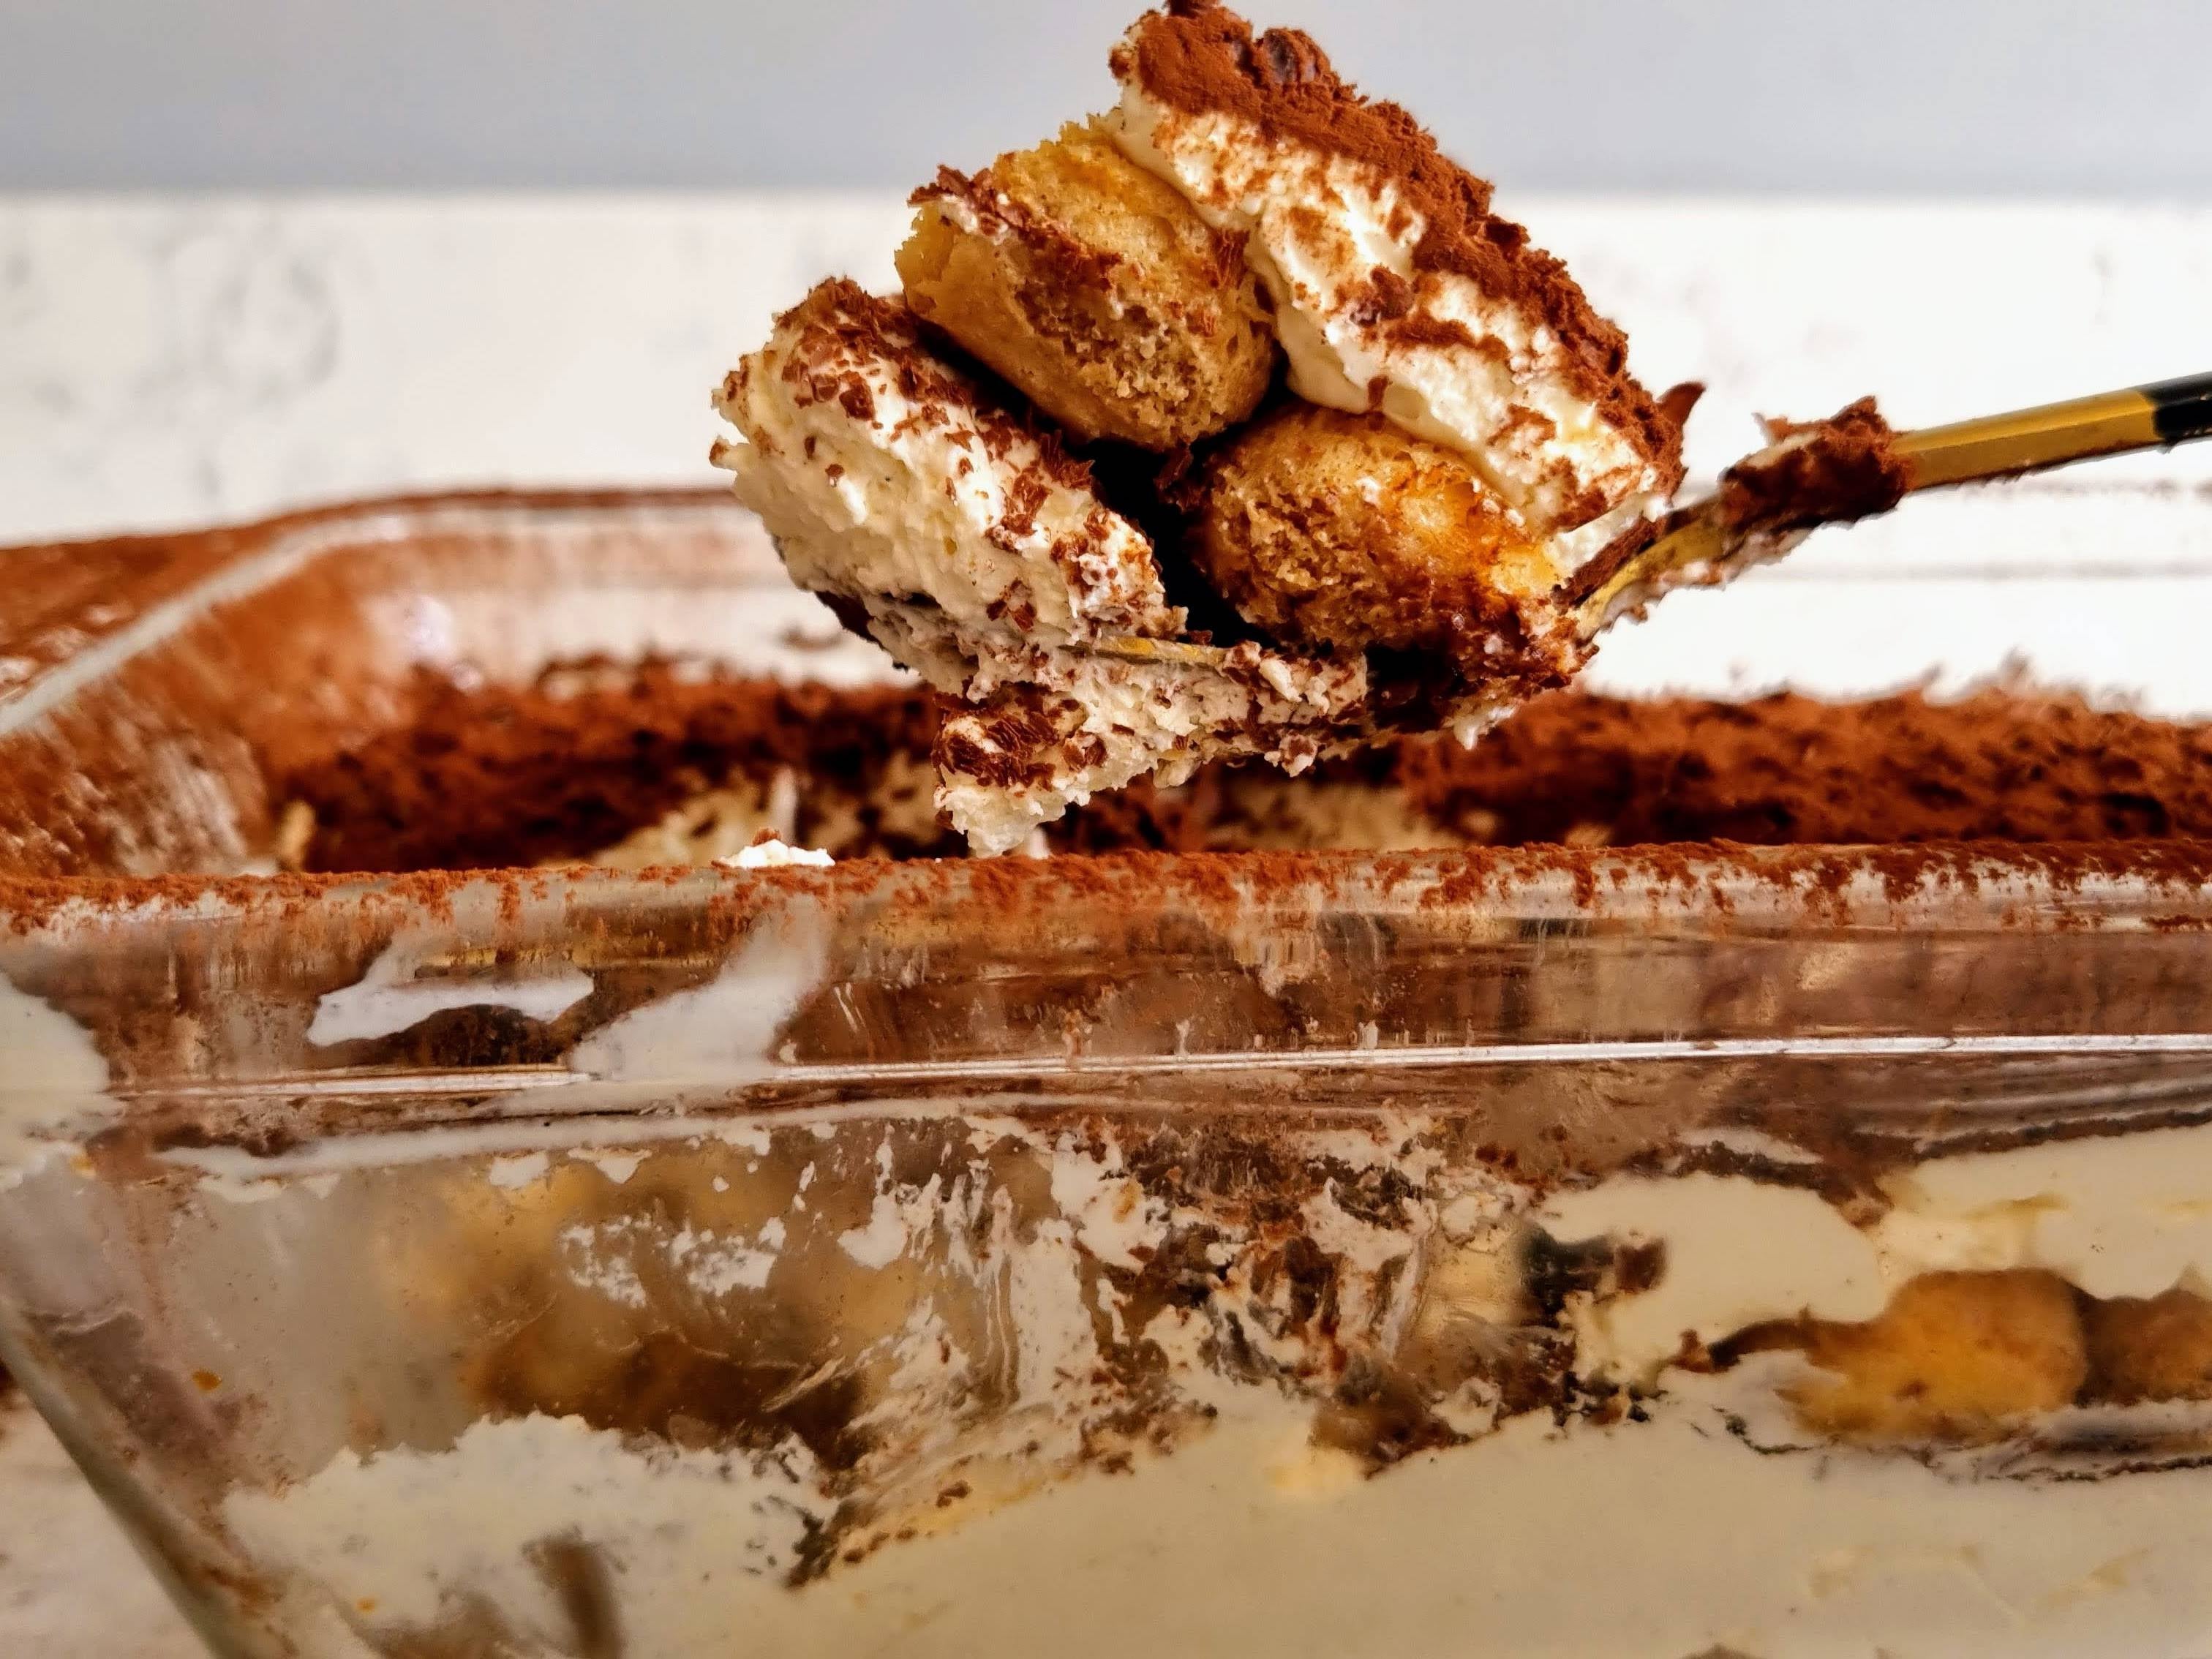 Homemade tiramisu with sponge fingers, cream and cocoa powder being taken out of baking dish with a spatula